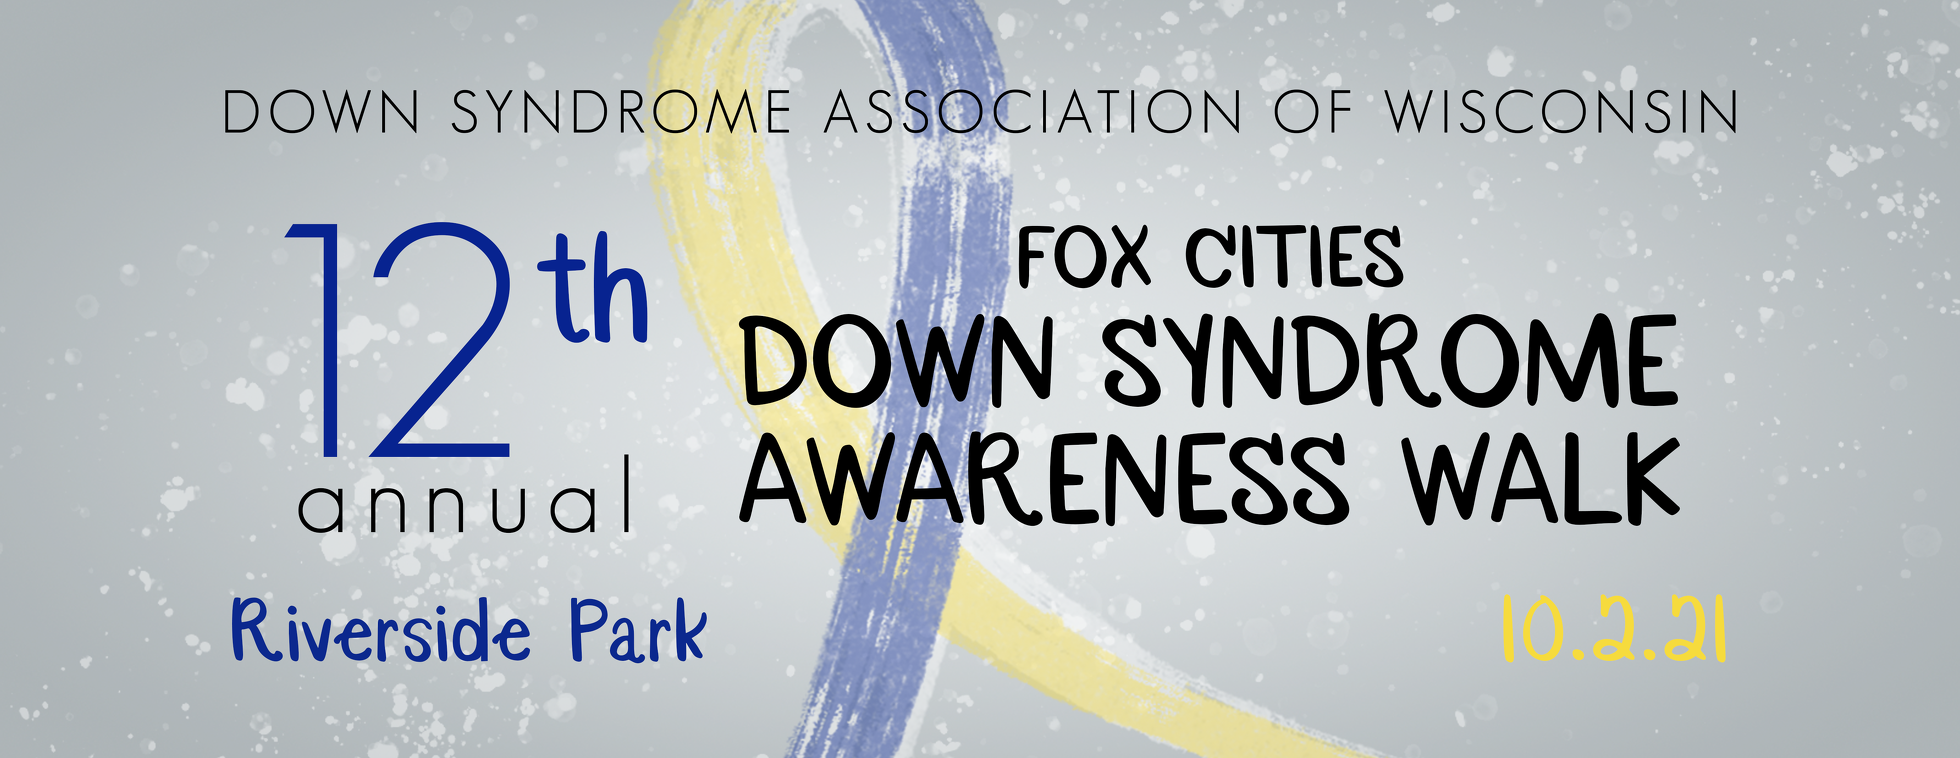 12th Annual Fox Cities Down Syndrome Awareness Walk 